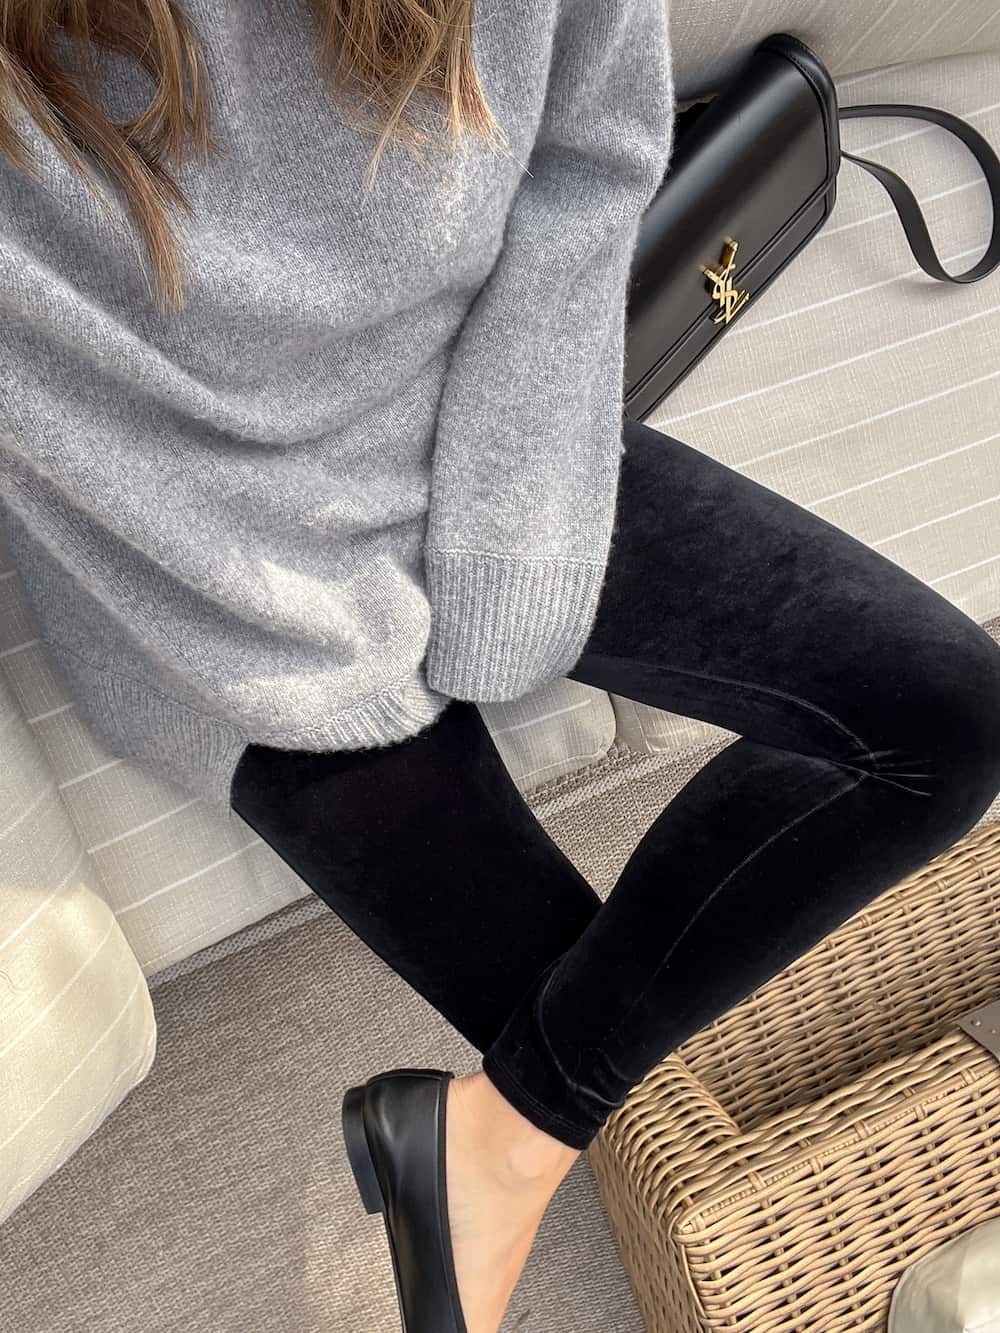 Up close shot of a woman wearing black velvet leggings with a grey sweater and ballet flats.